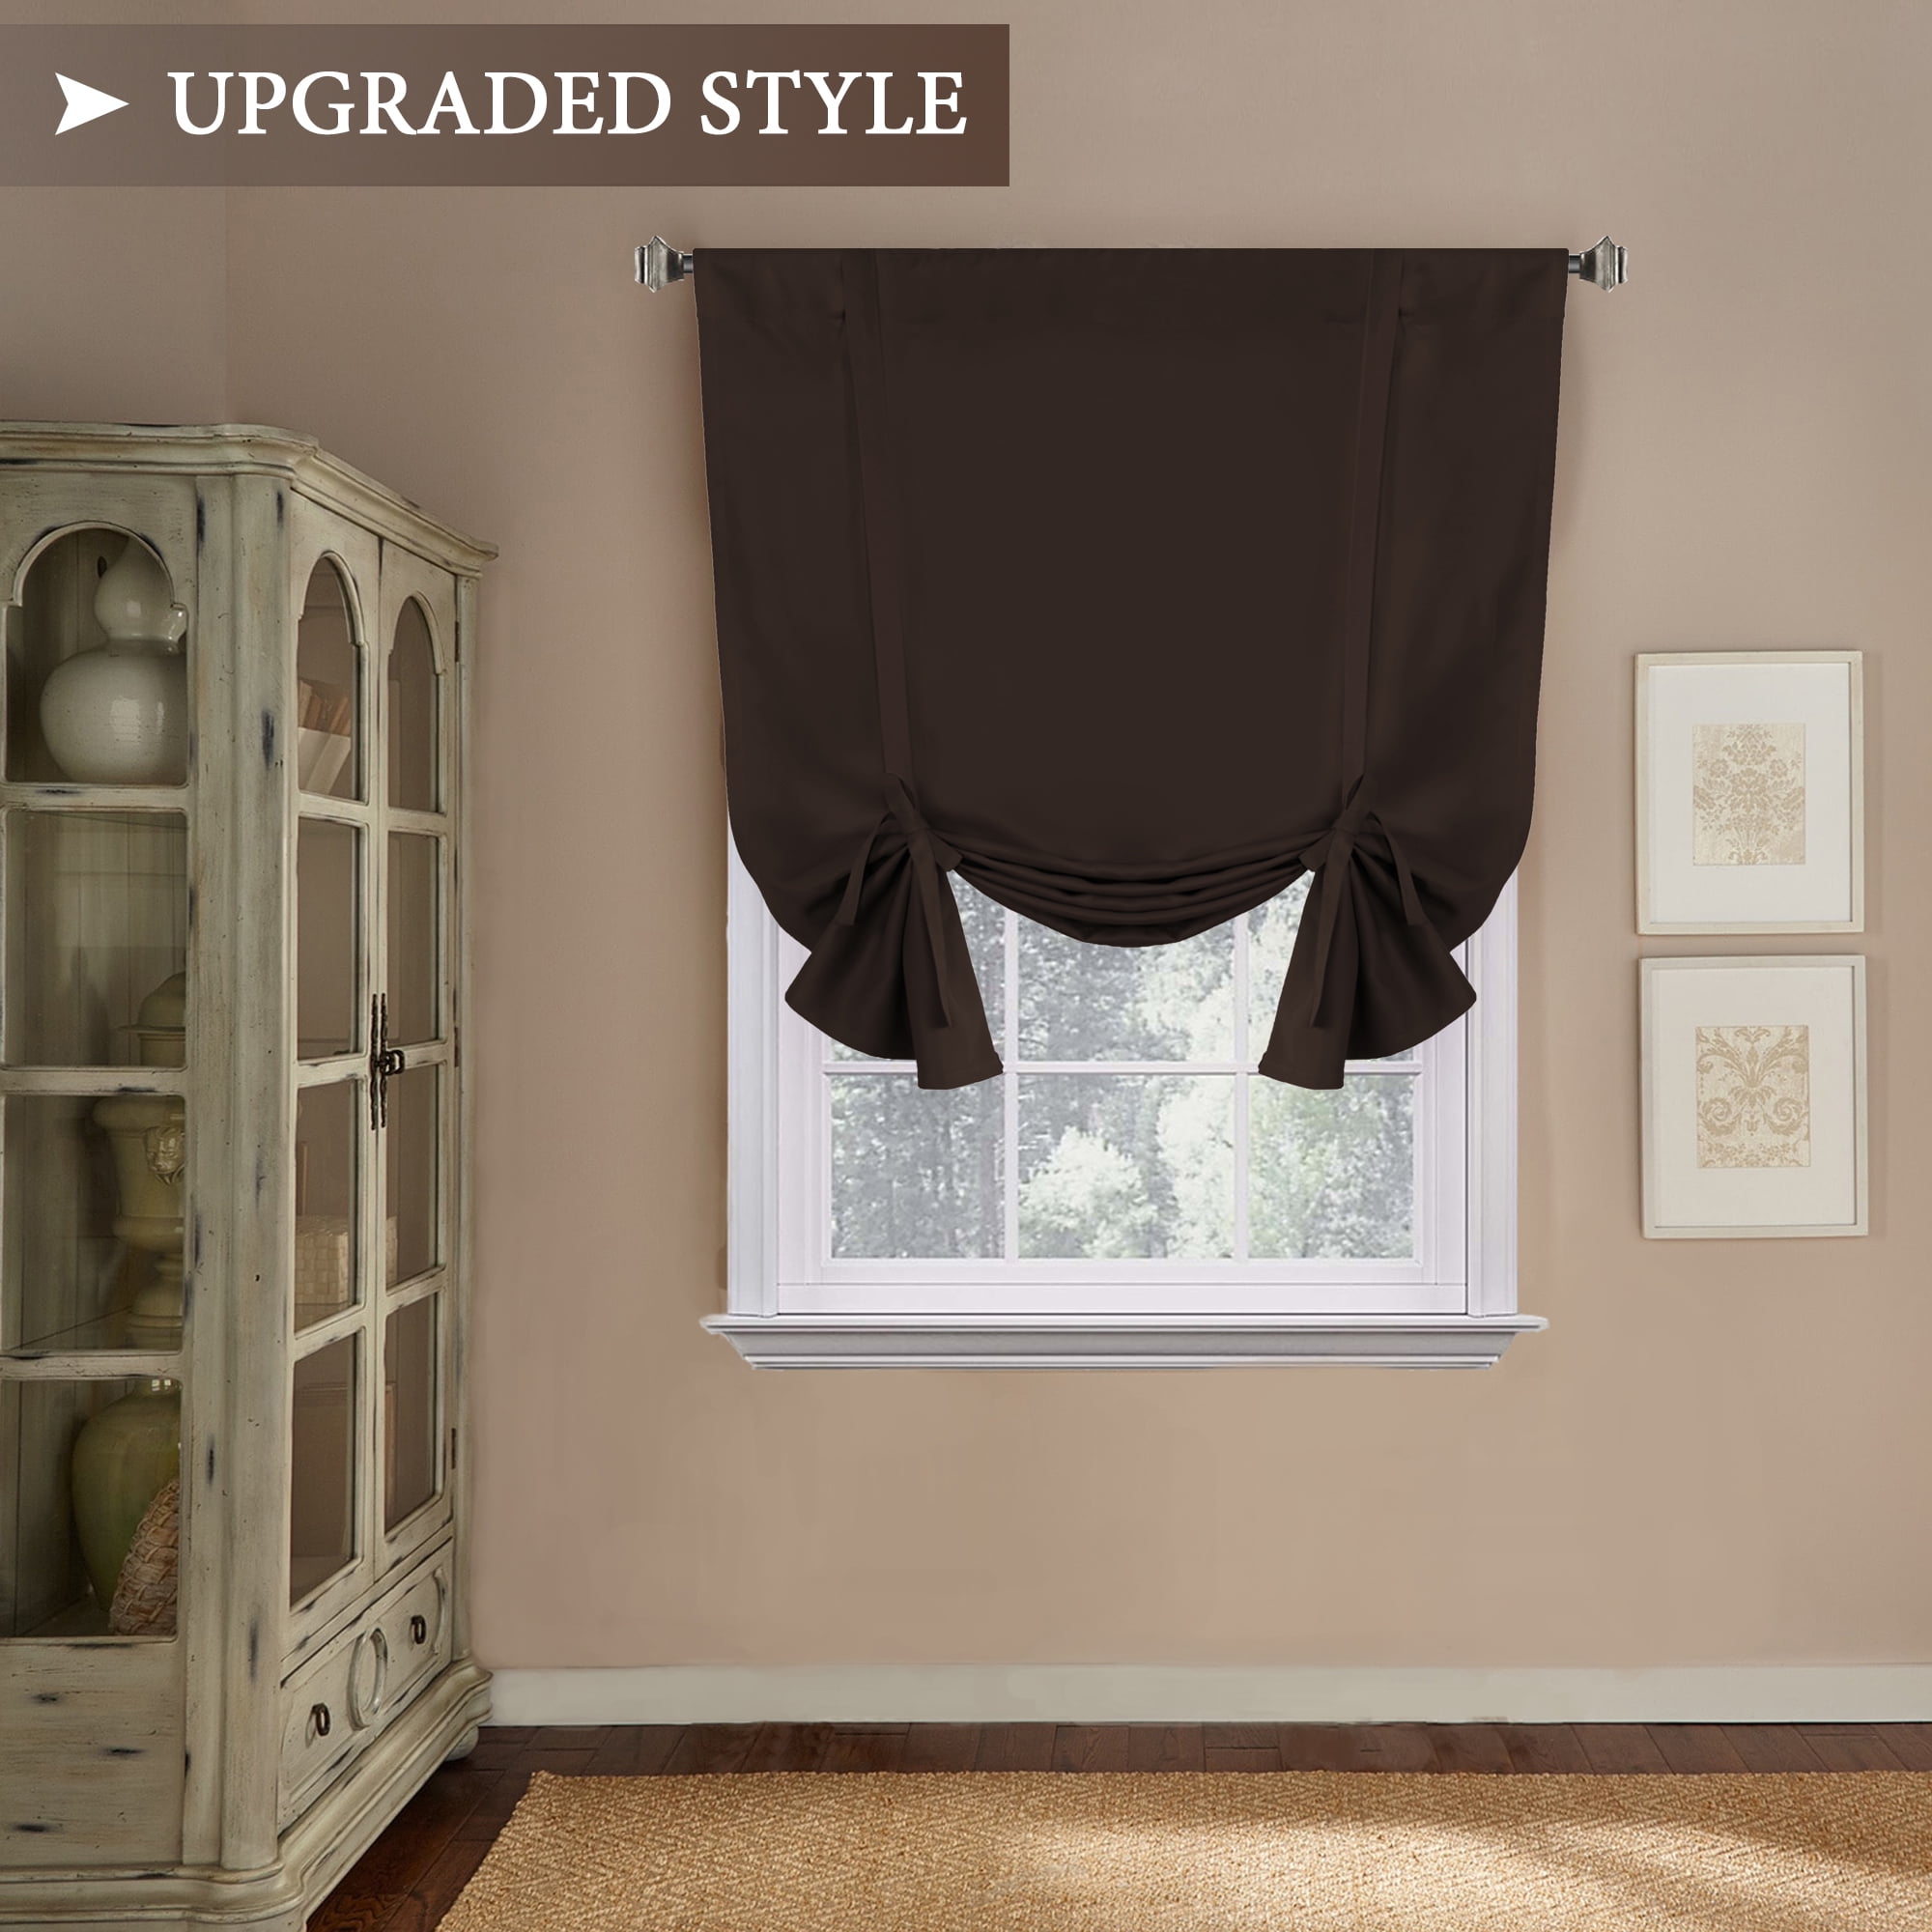 Blackout Energy Efficient Tie Up Shades -Rod Pocket Panel for Small Window, Chocolate Brown 42W x 63L (Set of 1) - H.VERSAILTEX